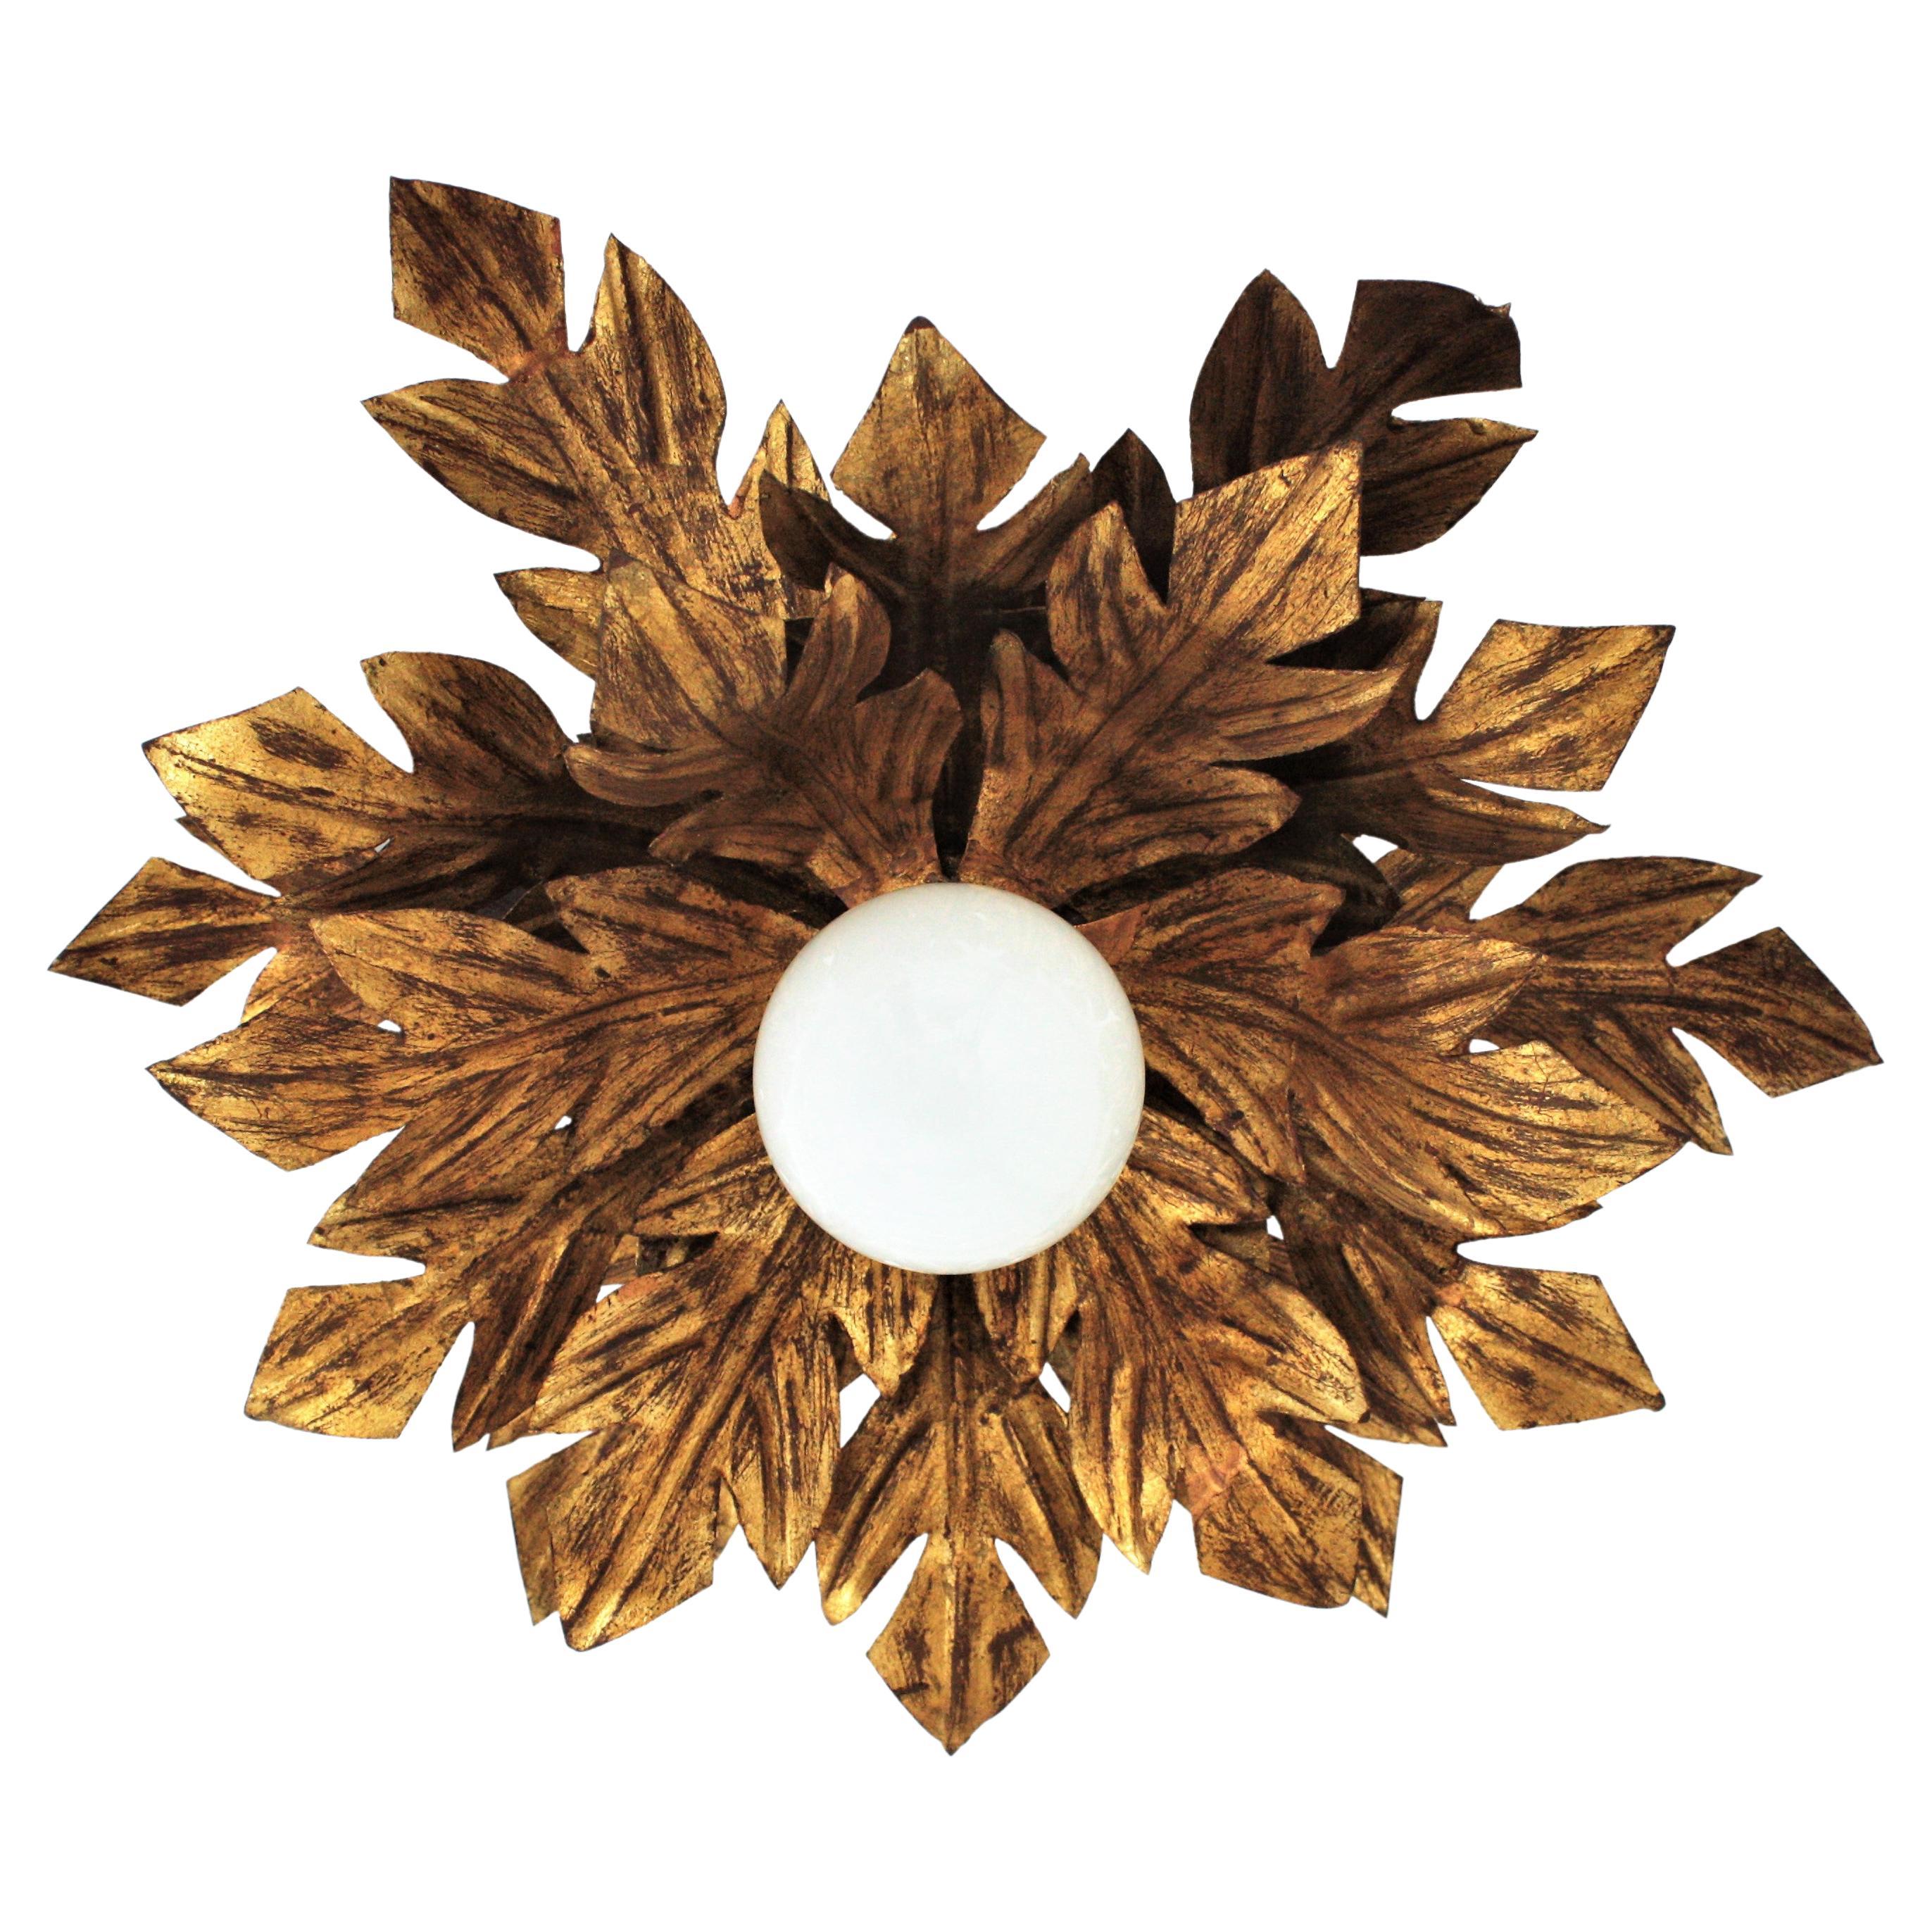 Spanish Sunburst Foliage Flower Light Fixture in Gilt Metal, 1950s
Gorgeous Hollywood Regency hand-hammered iron leafed flower burst flushmount or sconce with gold leaf finish. Spain, 1950s.
Three layers of leaves with a realistic distribution like